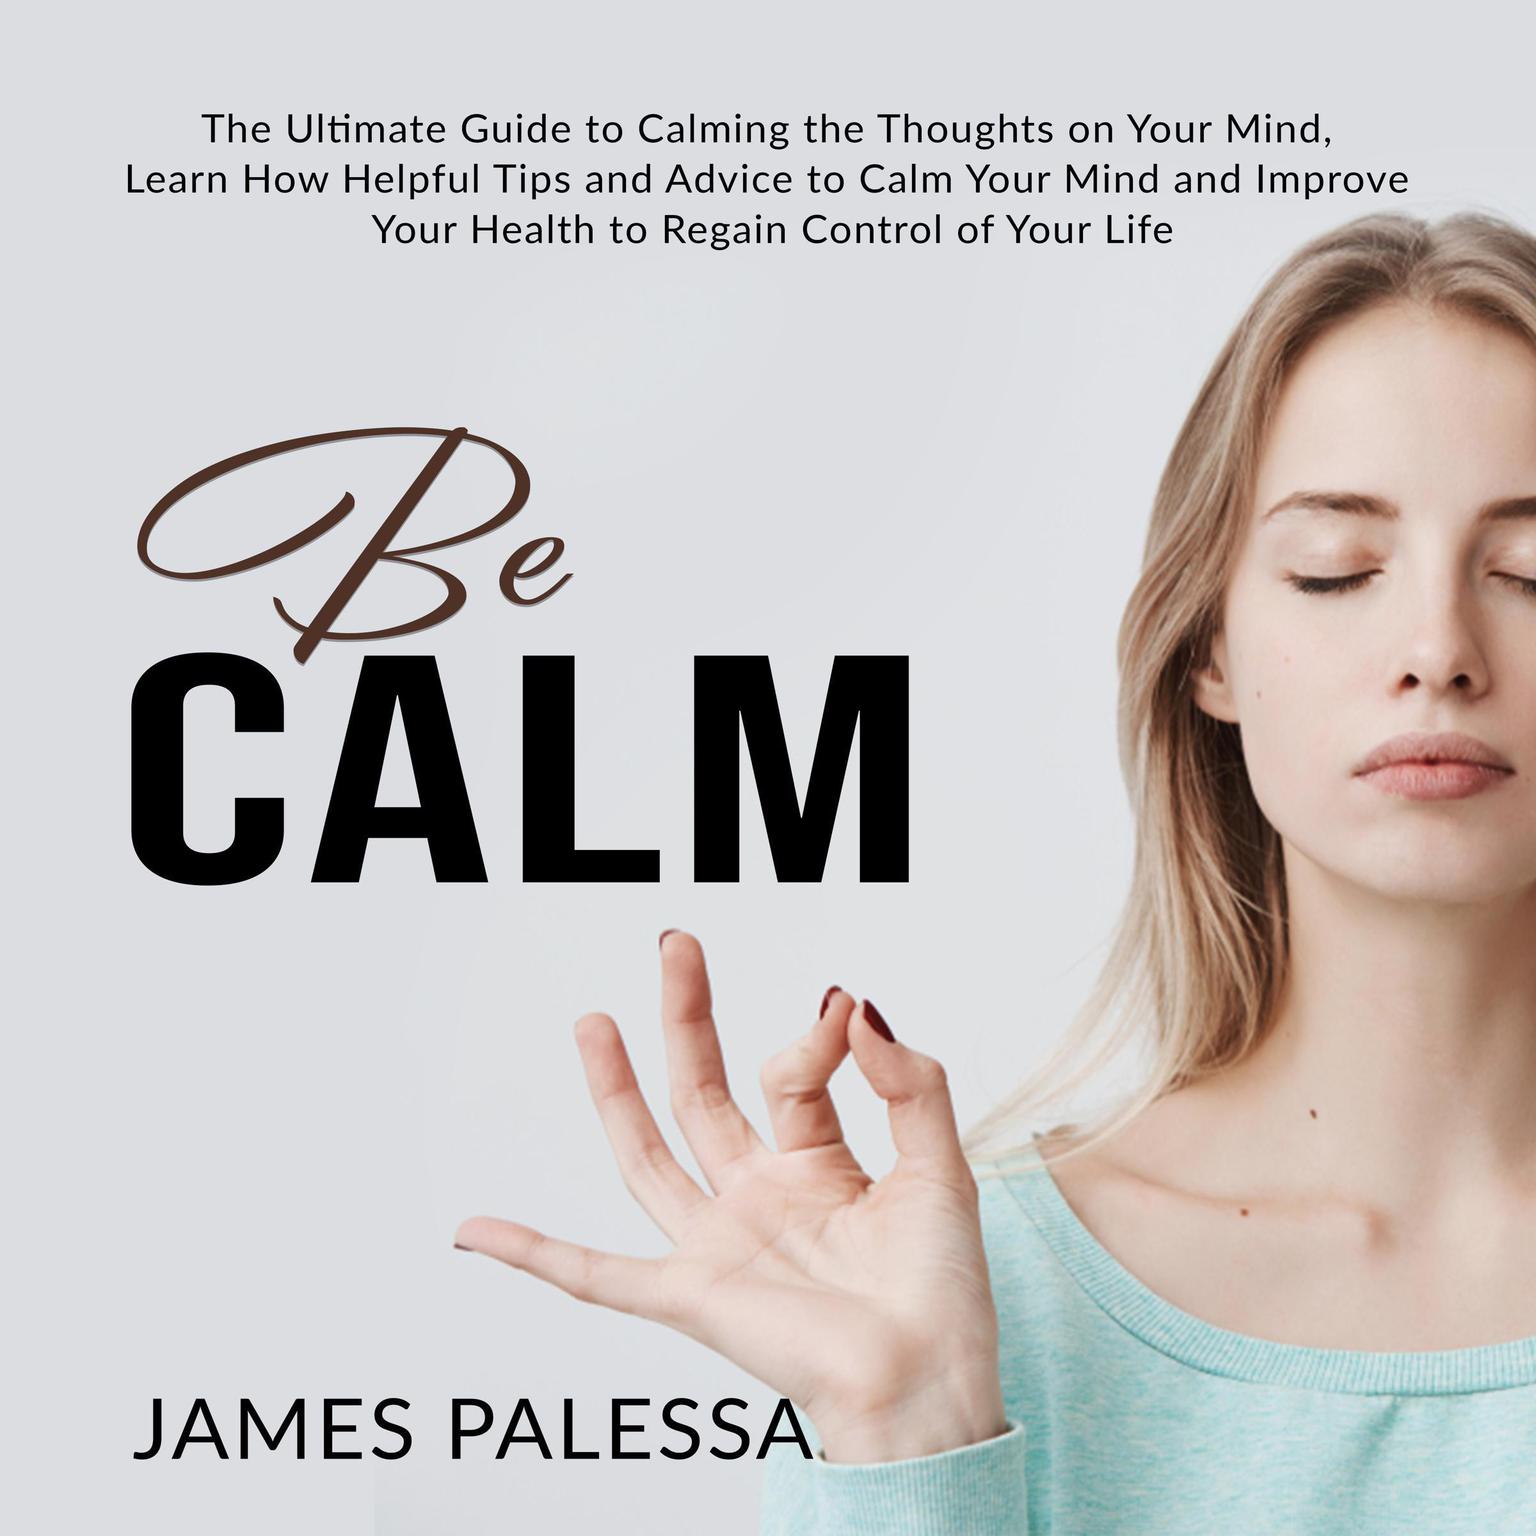 Be Calm: : The Ultimate Guide to Calming the Thoughts on Your Mind, Learn How Helpful Tips and Advice to Calm Your Mind and Improve Your Health to Regain Control of Your Life Audiobook, by James Palessa